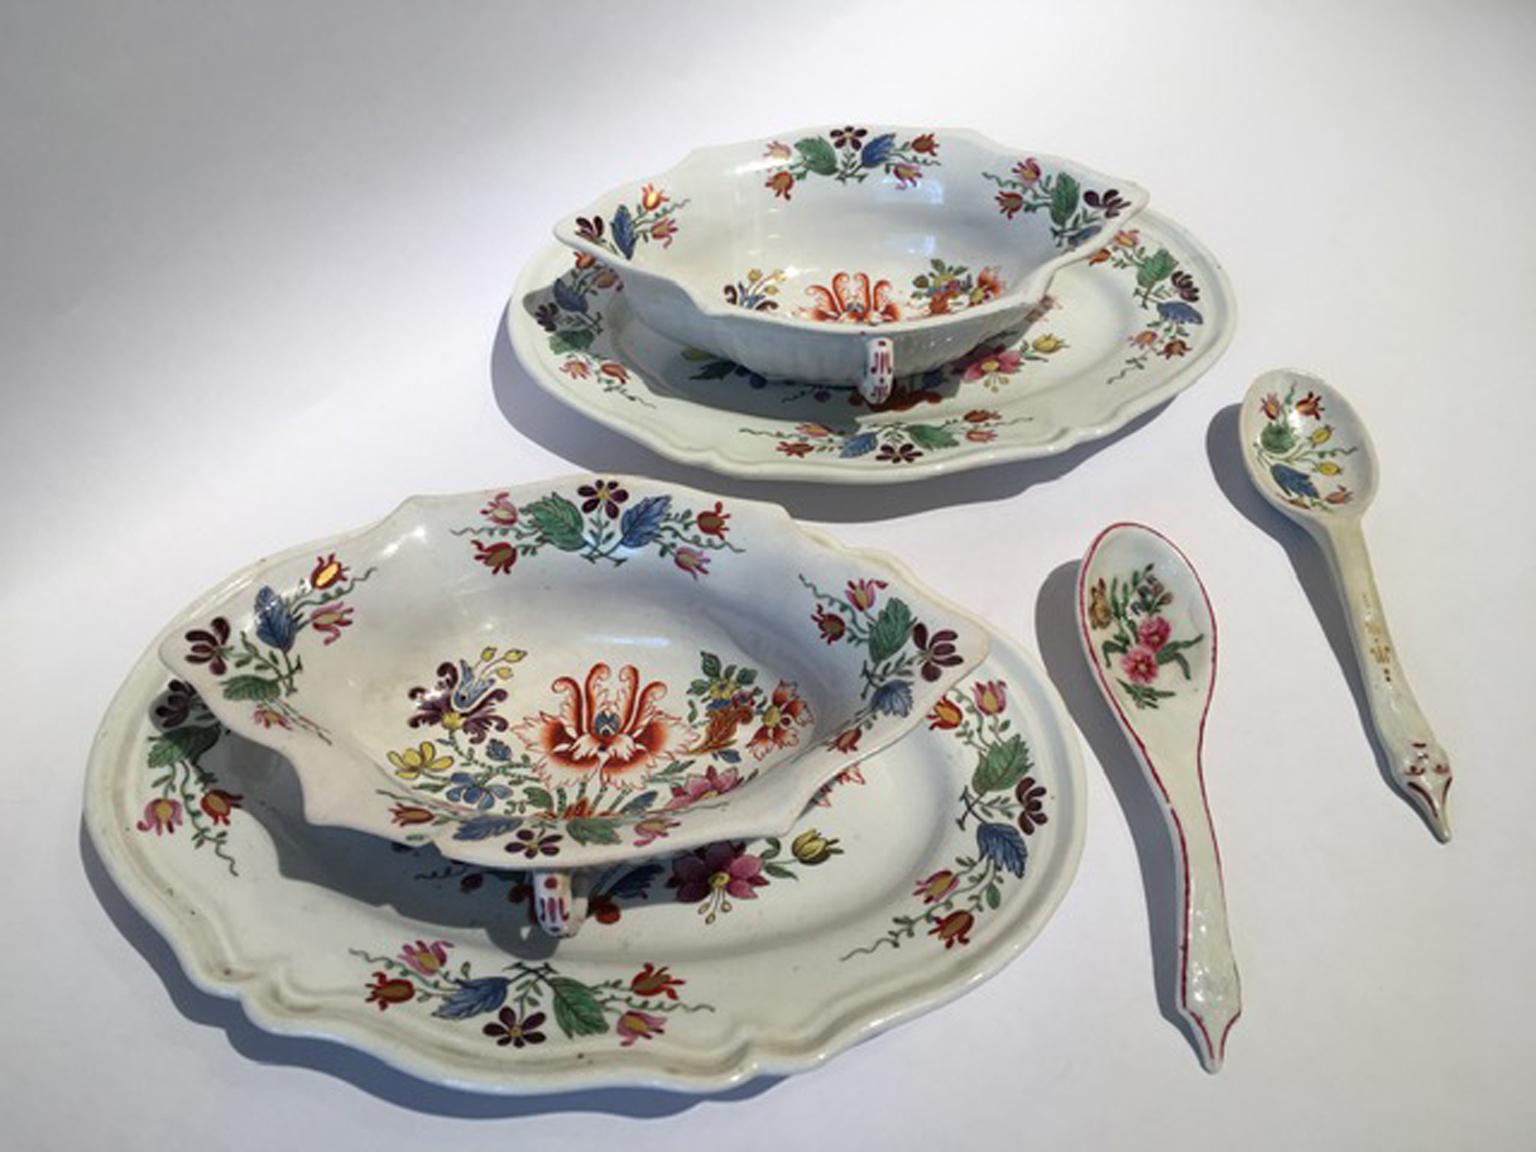 This pair of very beautiful porcelain sauce boats were handmade at the end of  the 18th Century in Italy by Richard Ginori. They were hand painted with the  most iconic decor of Richard Ginori: the Tulip decor in red. Nowadays the pieces with this